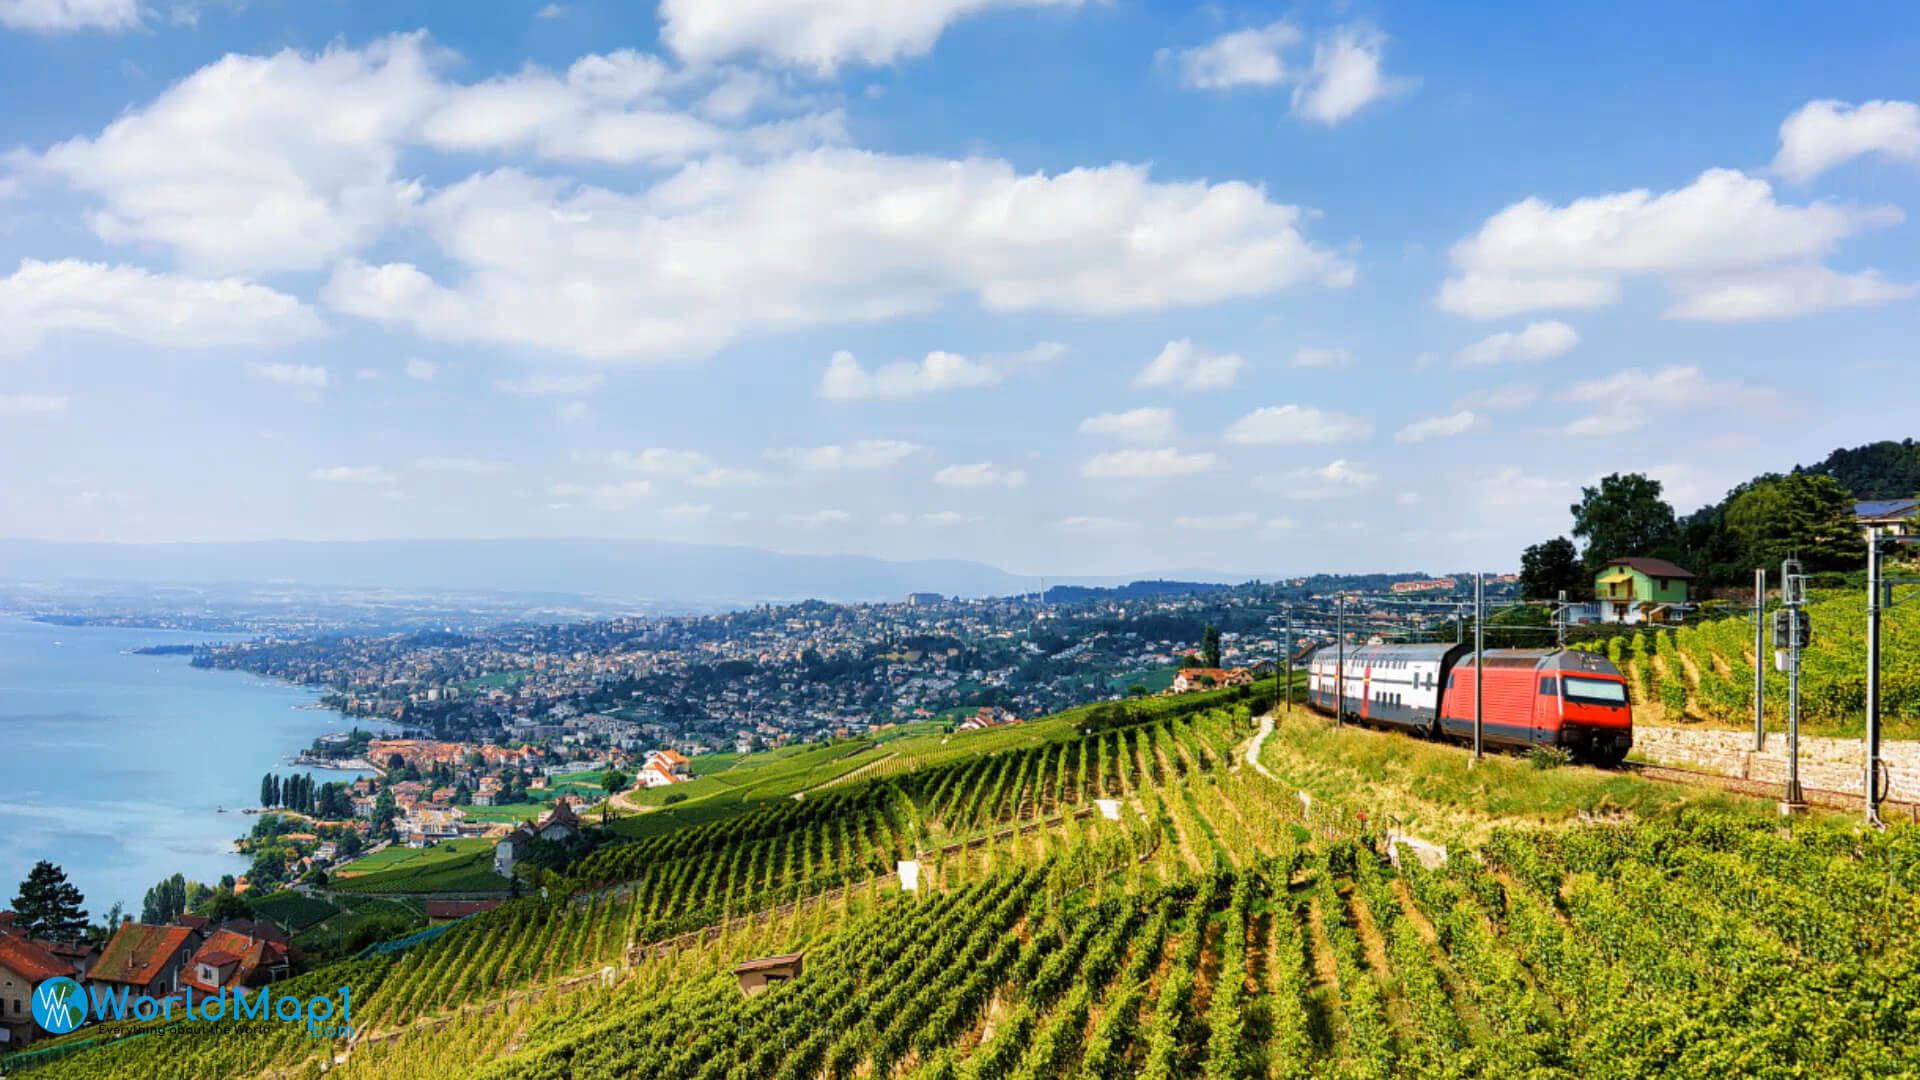 Train Passing Through the Vineyards in Lausanne